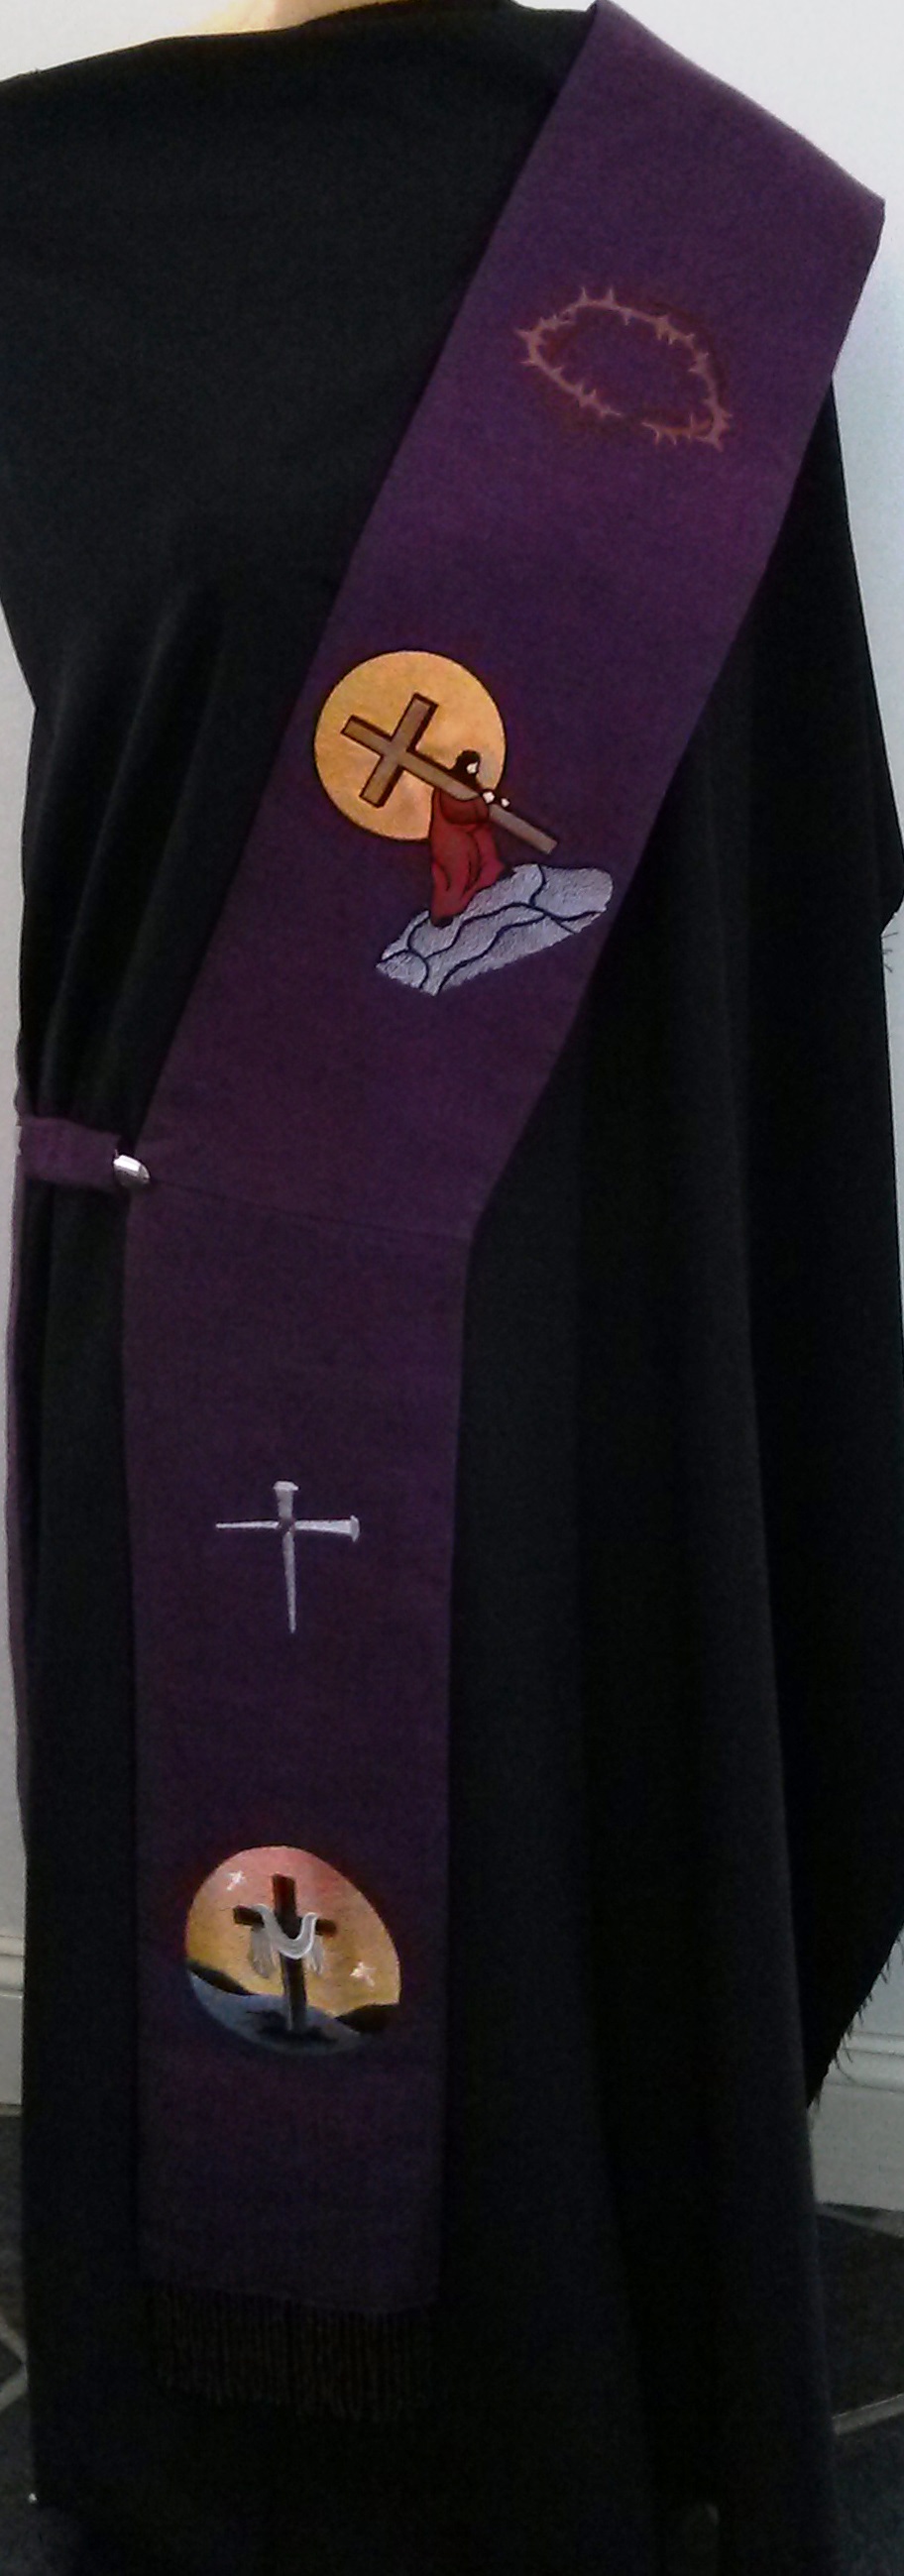 Deborah, This is a Clergy stole for a Deacon, depicting scenes from Lent/Easter.  The fabric is the heavy wei...